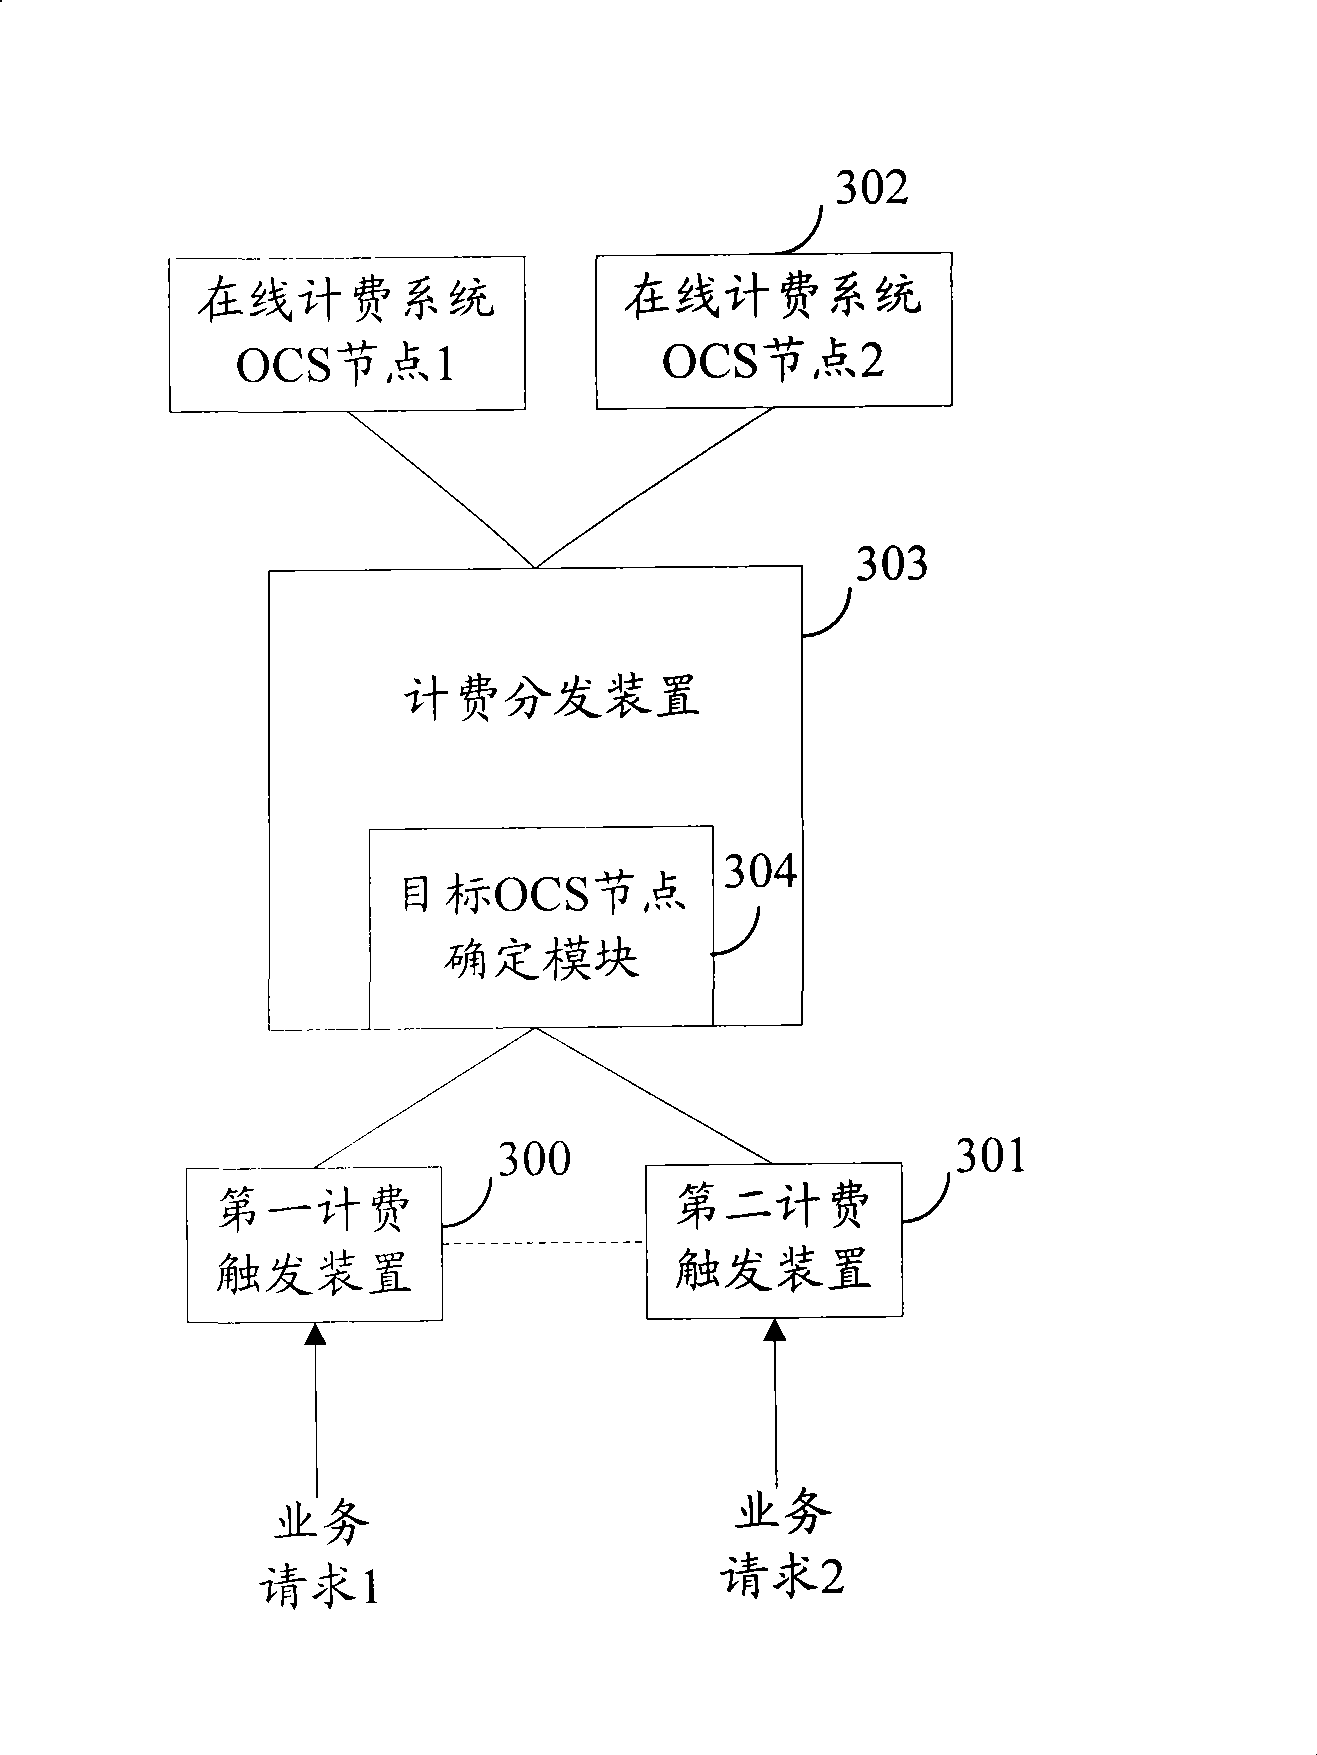 Method and system for processing charging request, method and apparatus for triggering and distributing charging